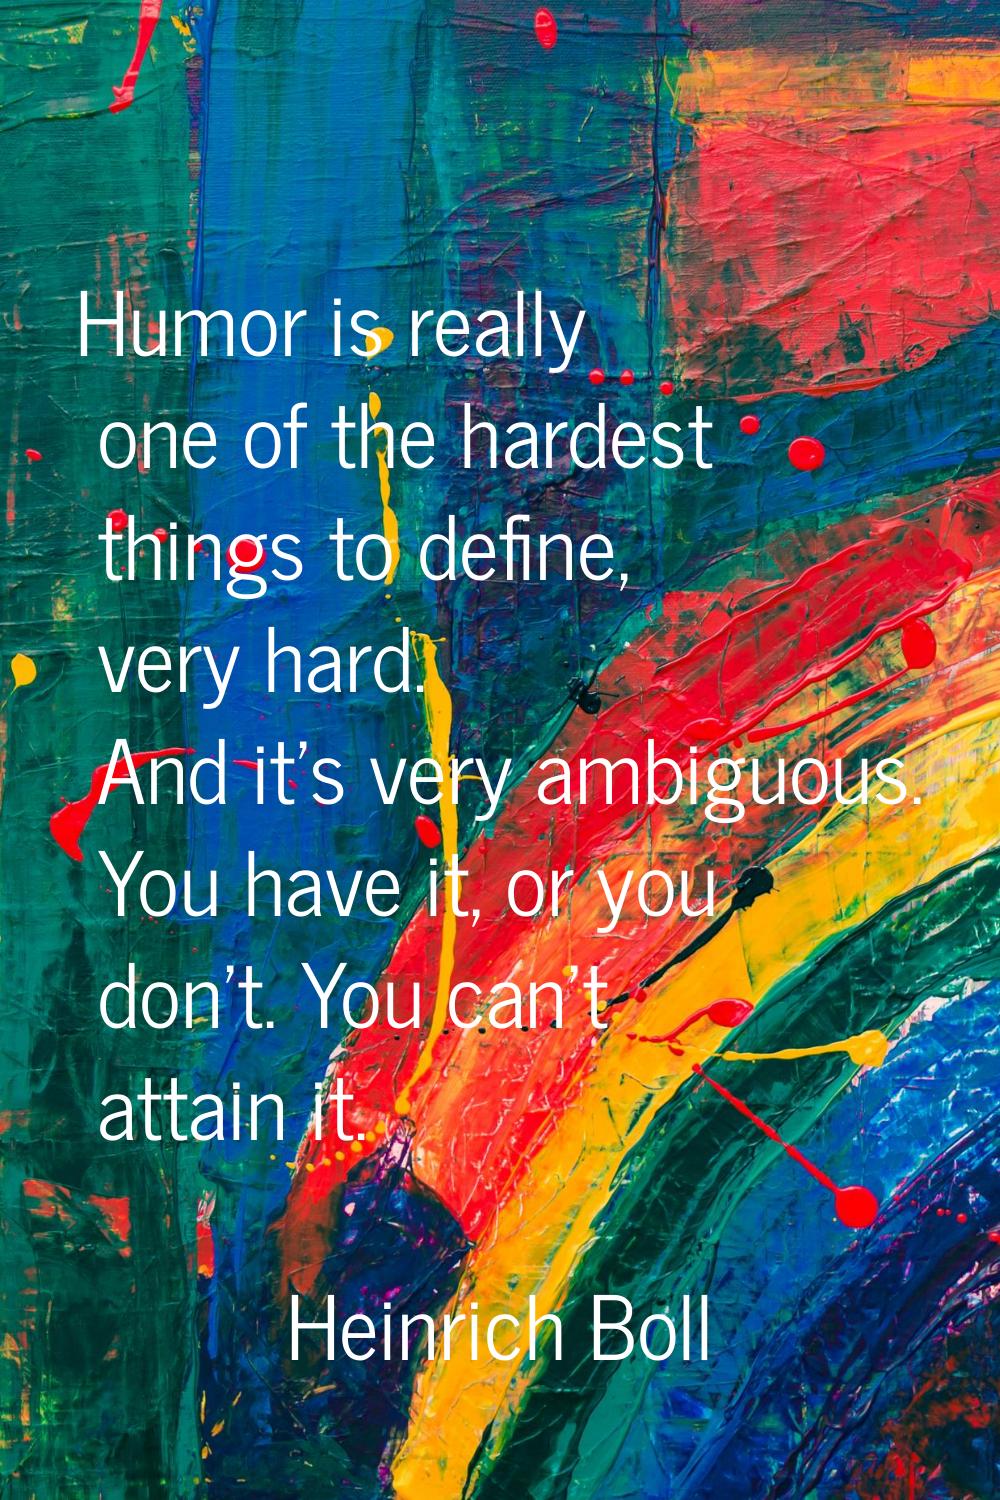 Humor is really one of the hardest things to define, very hard. And it's very ambiguous. You have i